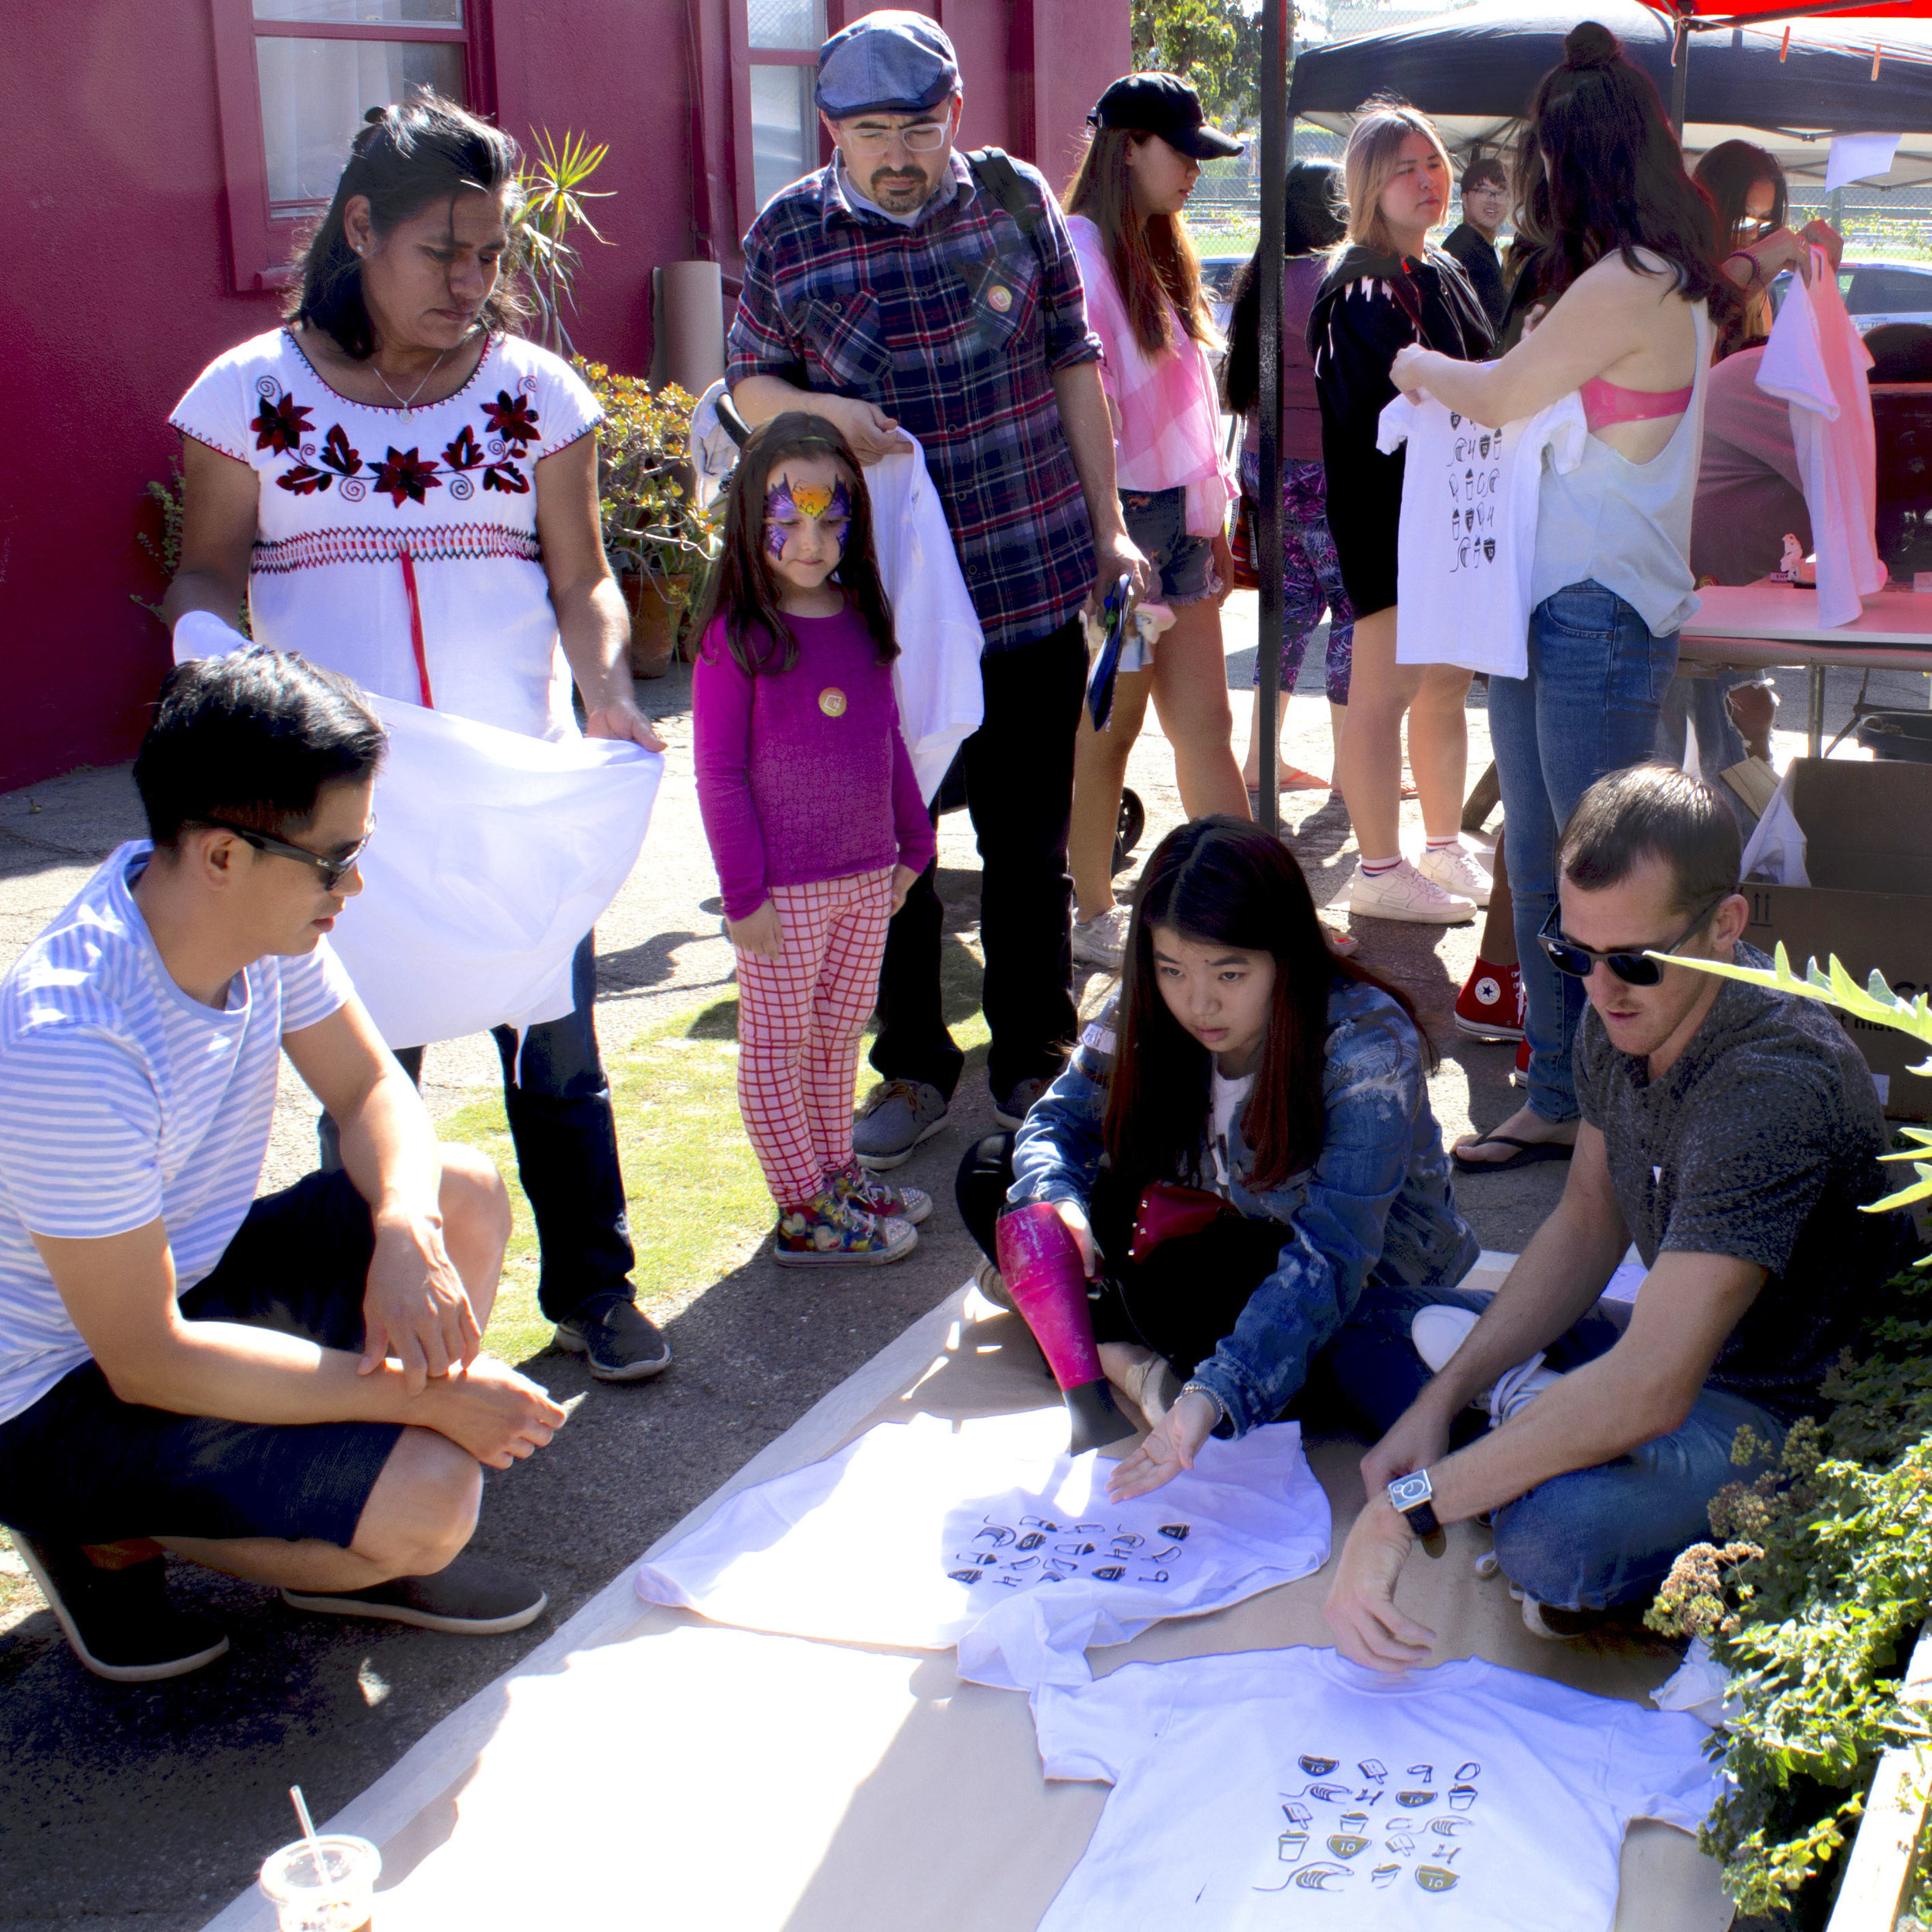  A small group of people gather around for the screen-Printing workshop at the Pico Block Party on October 14, 2017 in Santa Monica, Calif. (Photo By Emeline Moquillon) 